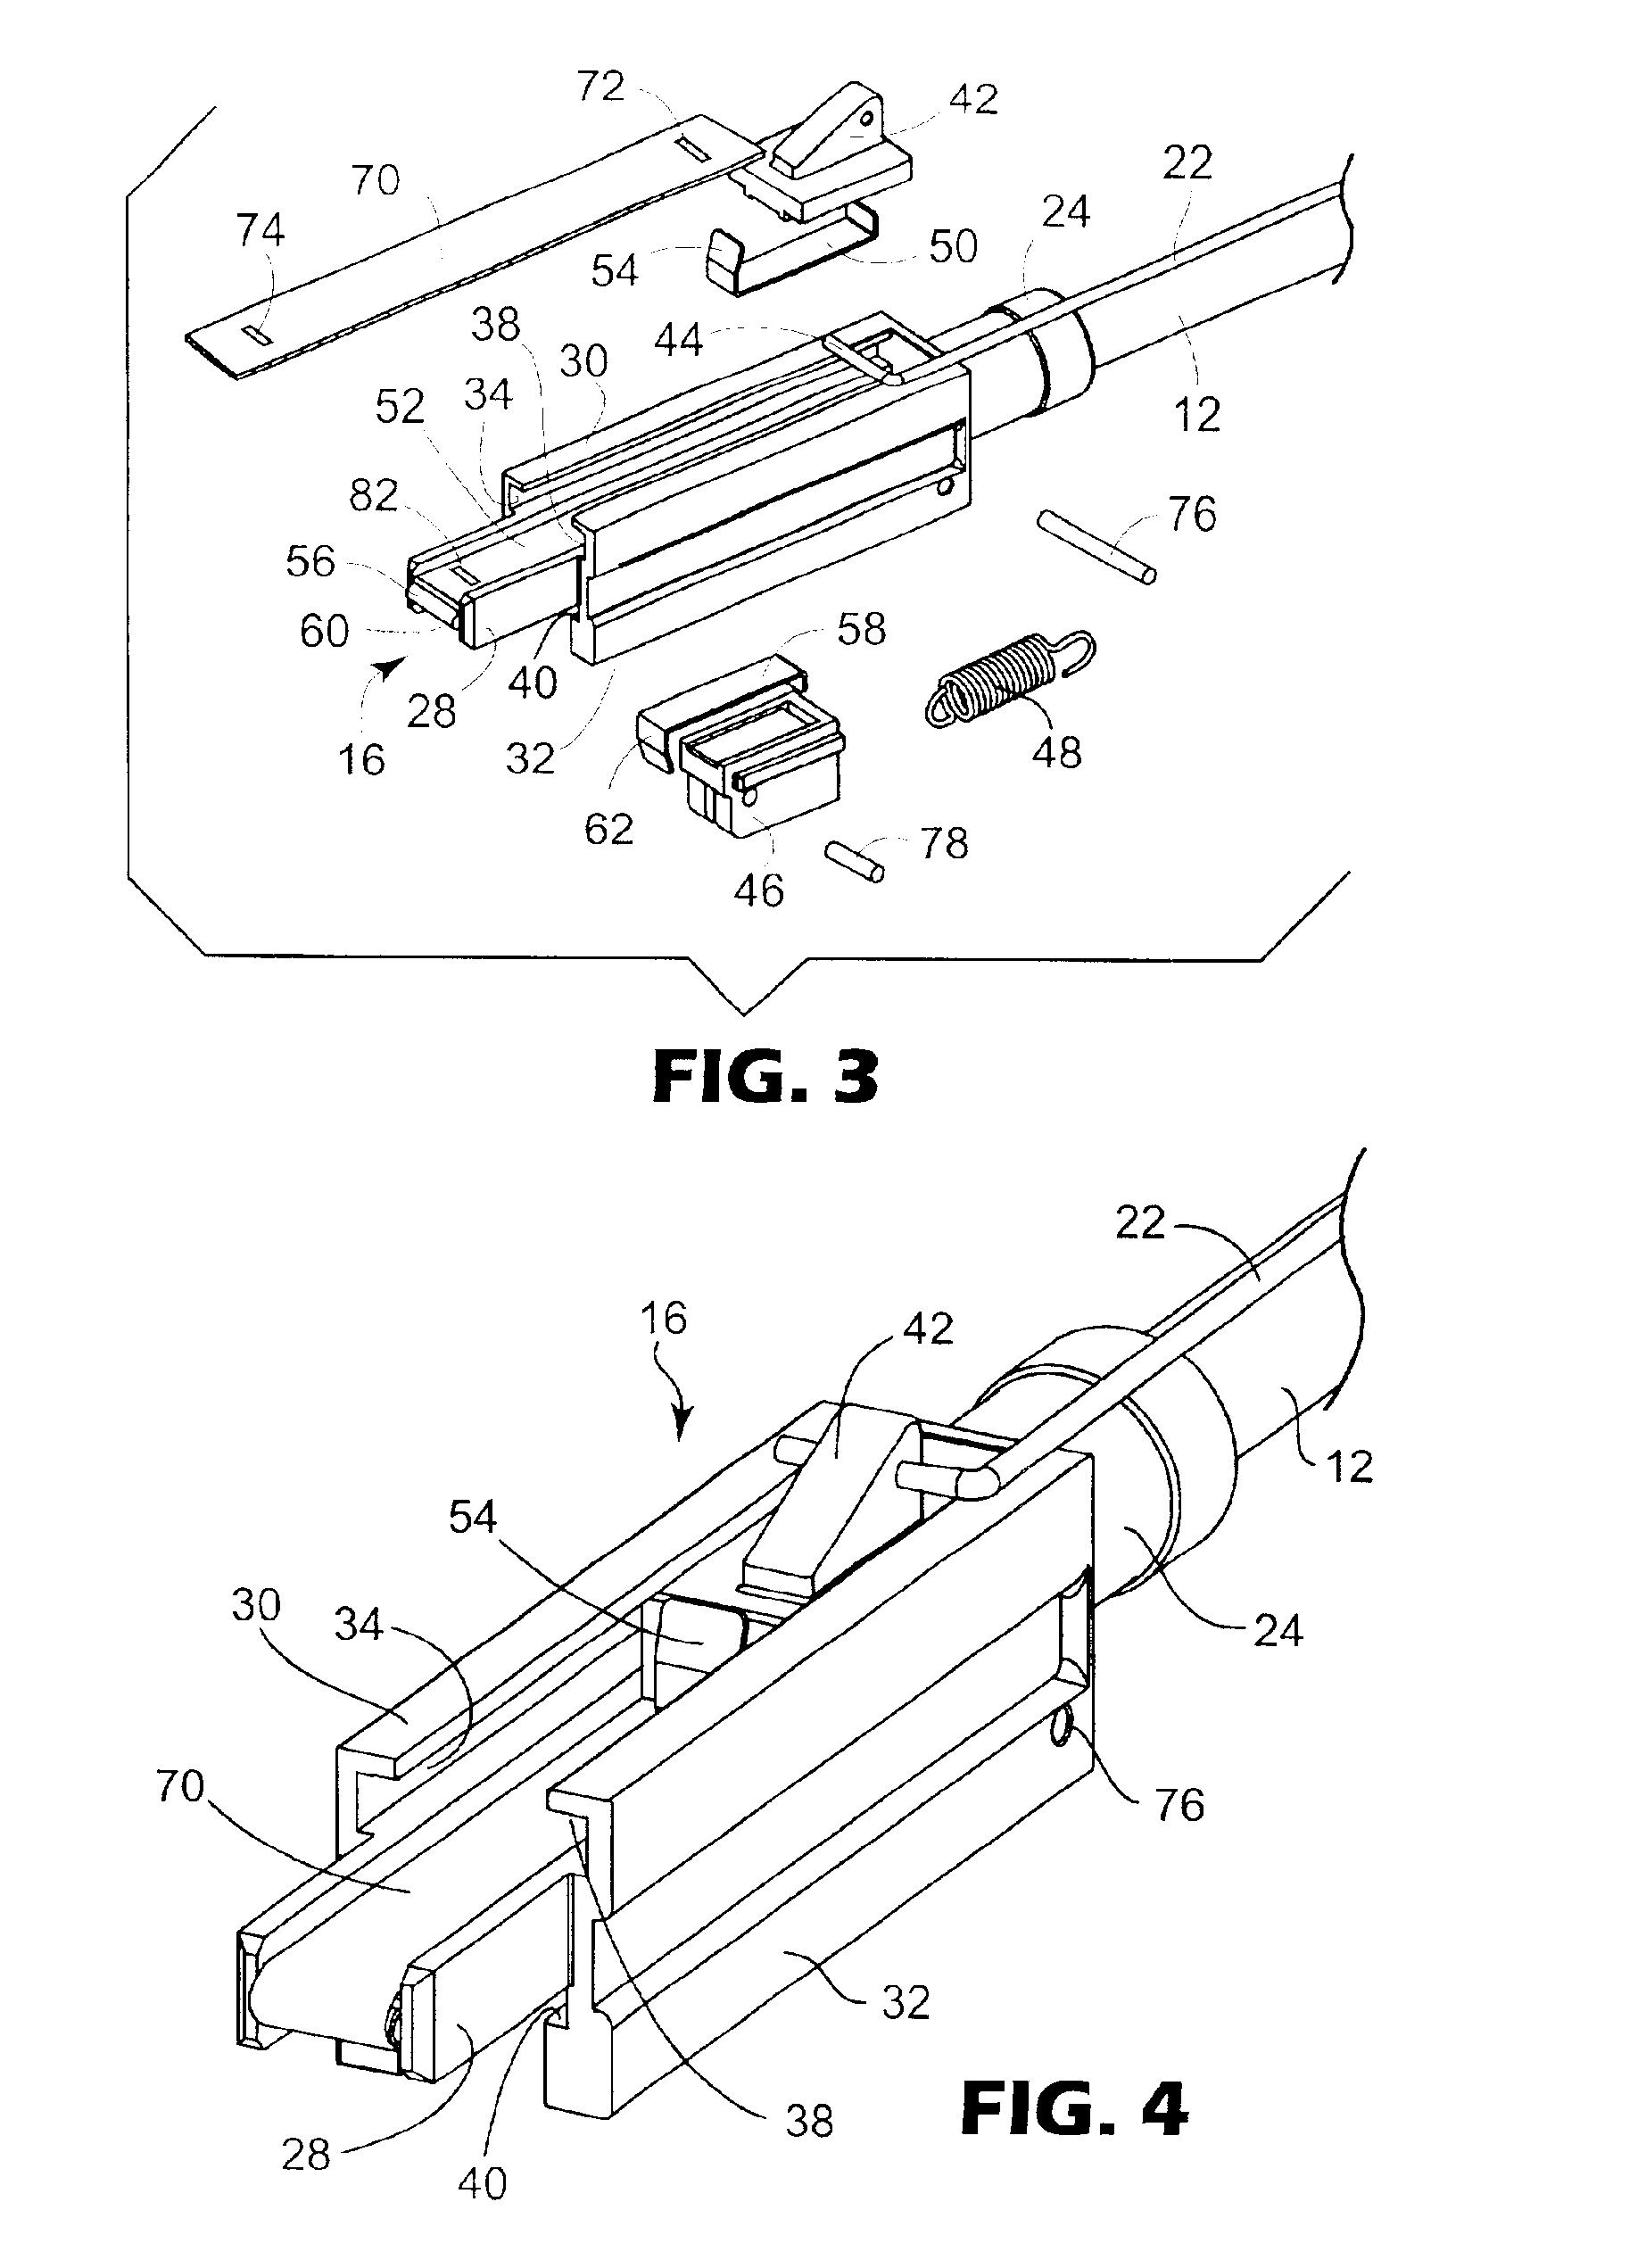 Article and process for cleaning optical surfaces